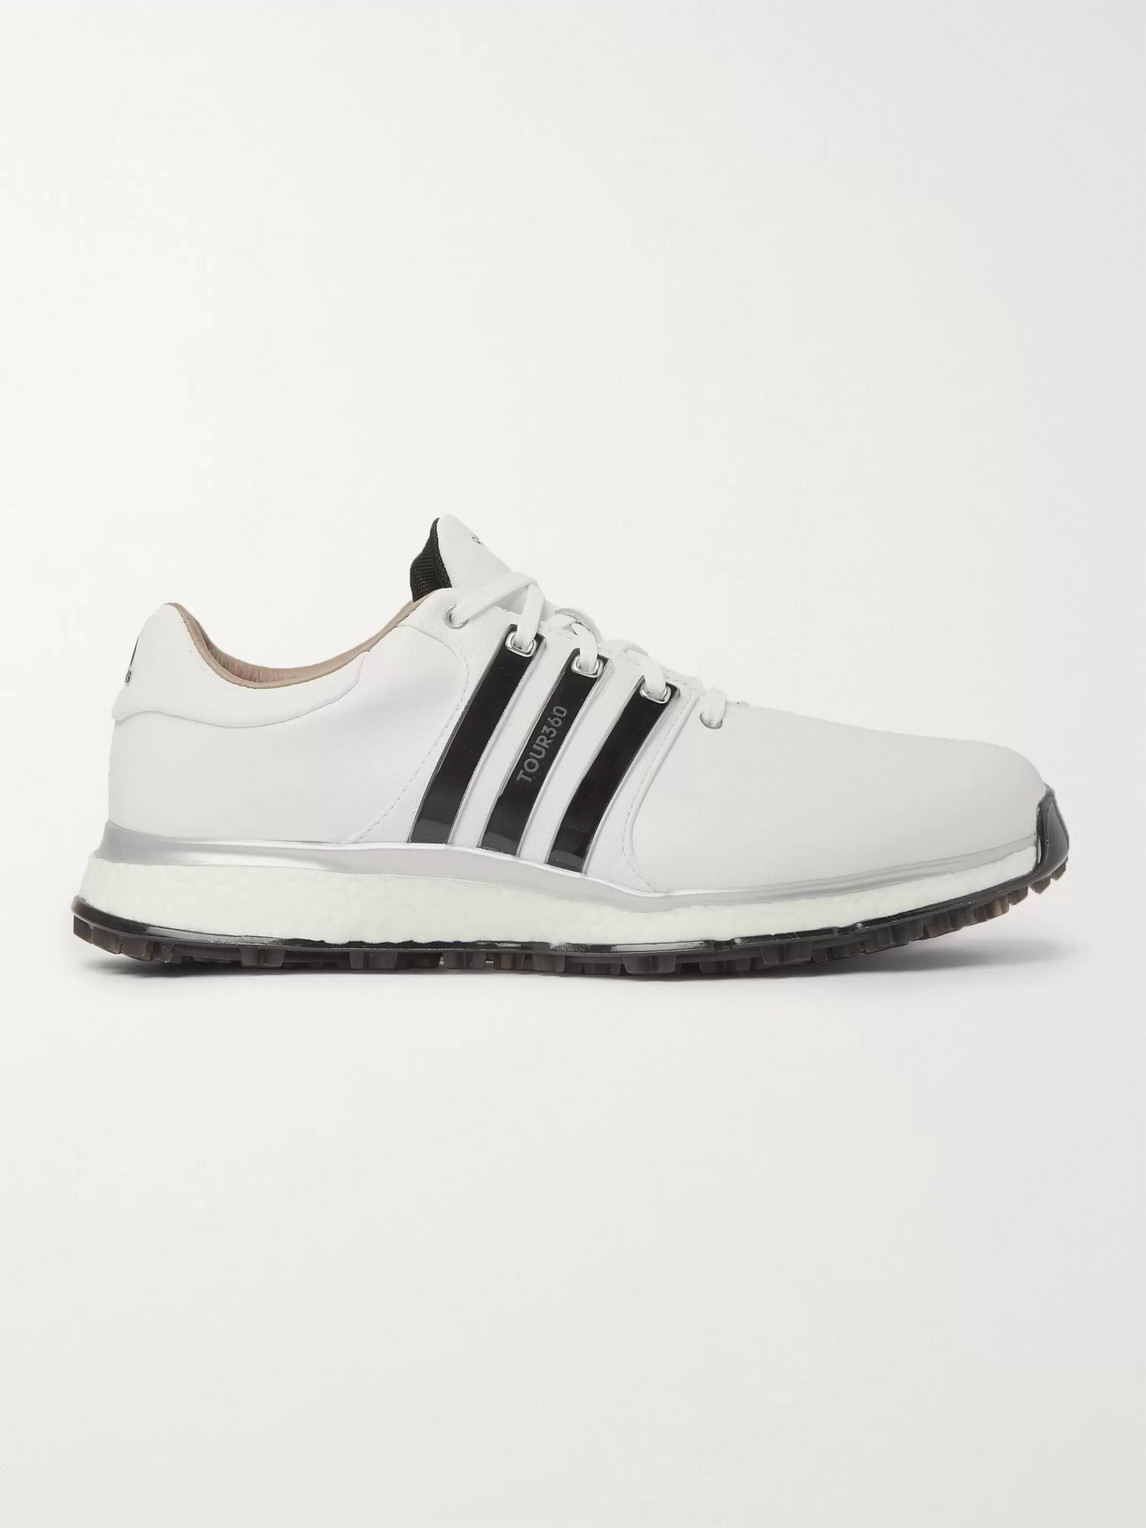 Adidas Golf Tour360 Xt-sl Leather And Mesh Golf Shoes In White